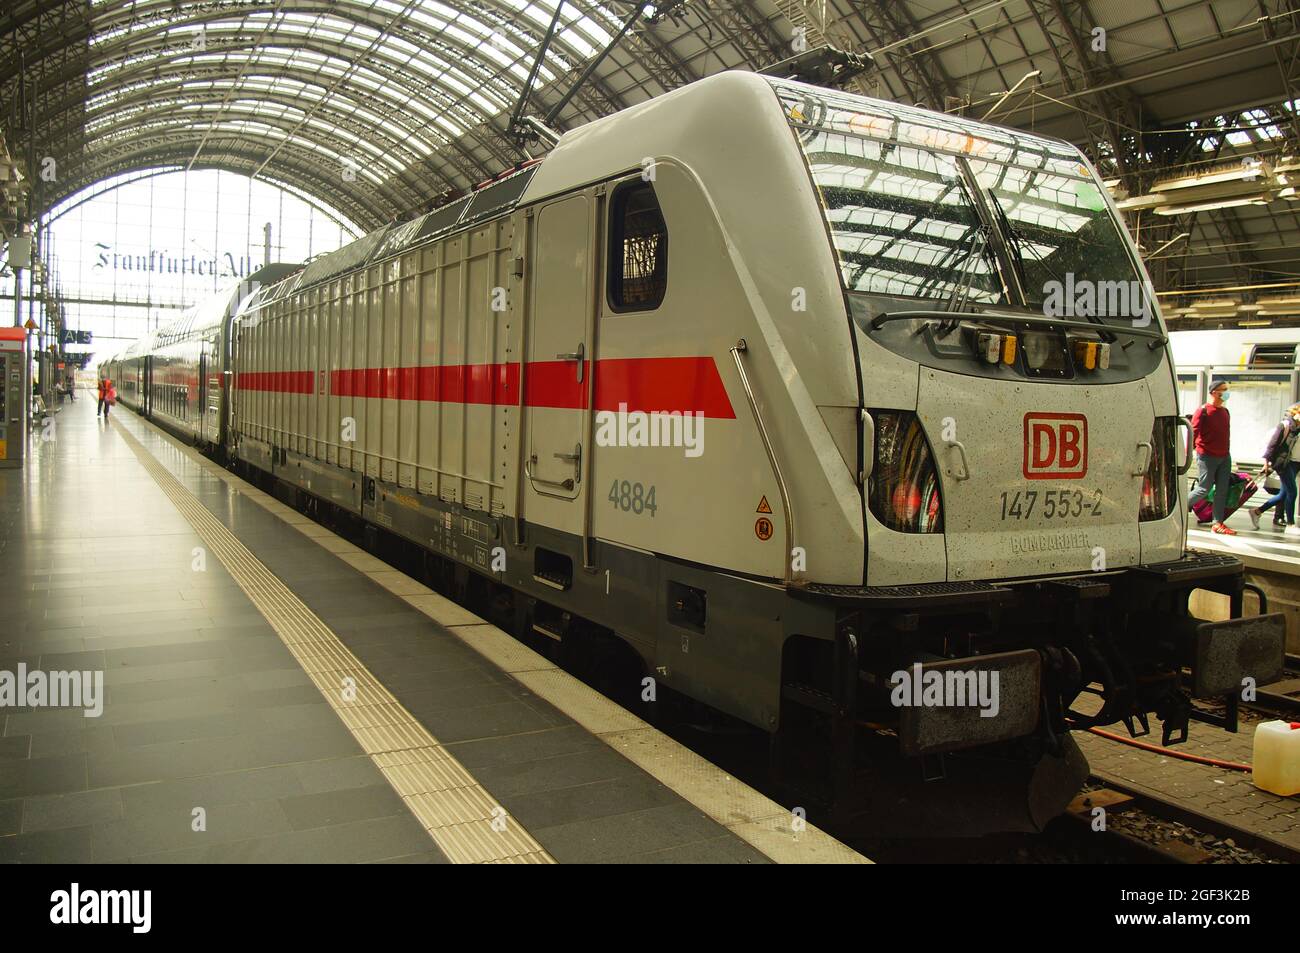 FRANKFURT, GERMANY - Aug 20, 2021: An Intercity has reached Frankfurt Central Station. An IC2 with double-decker coaches hauled by a Bombardier TRAXX Stock Photo